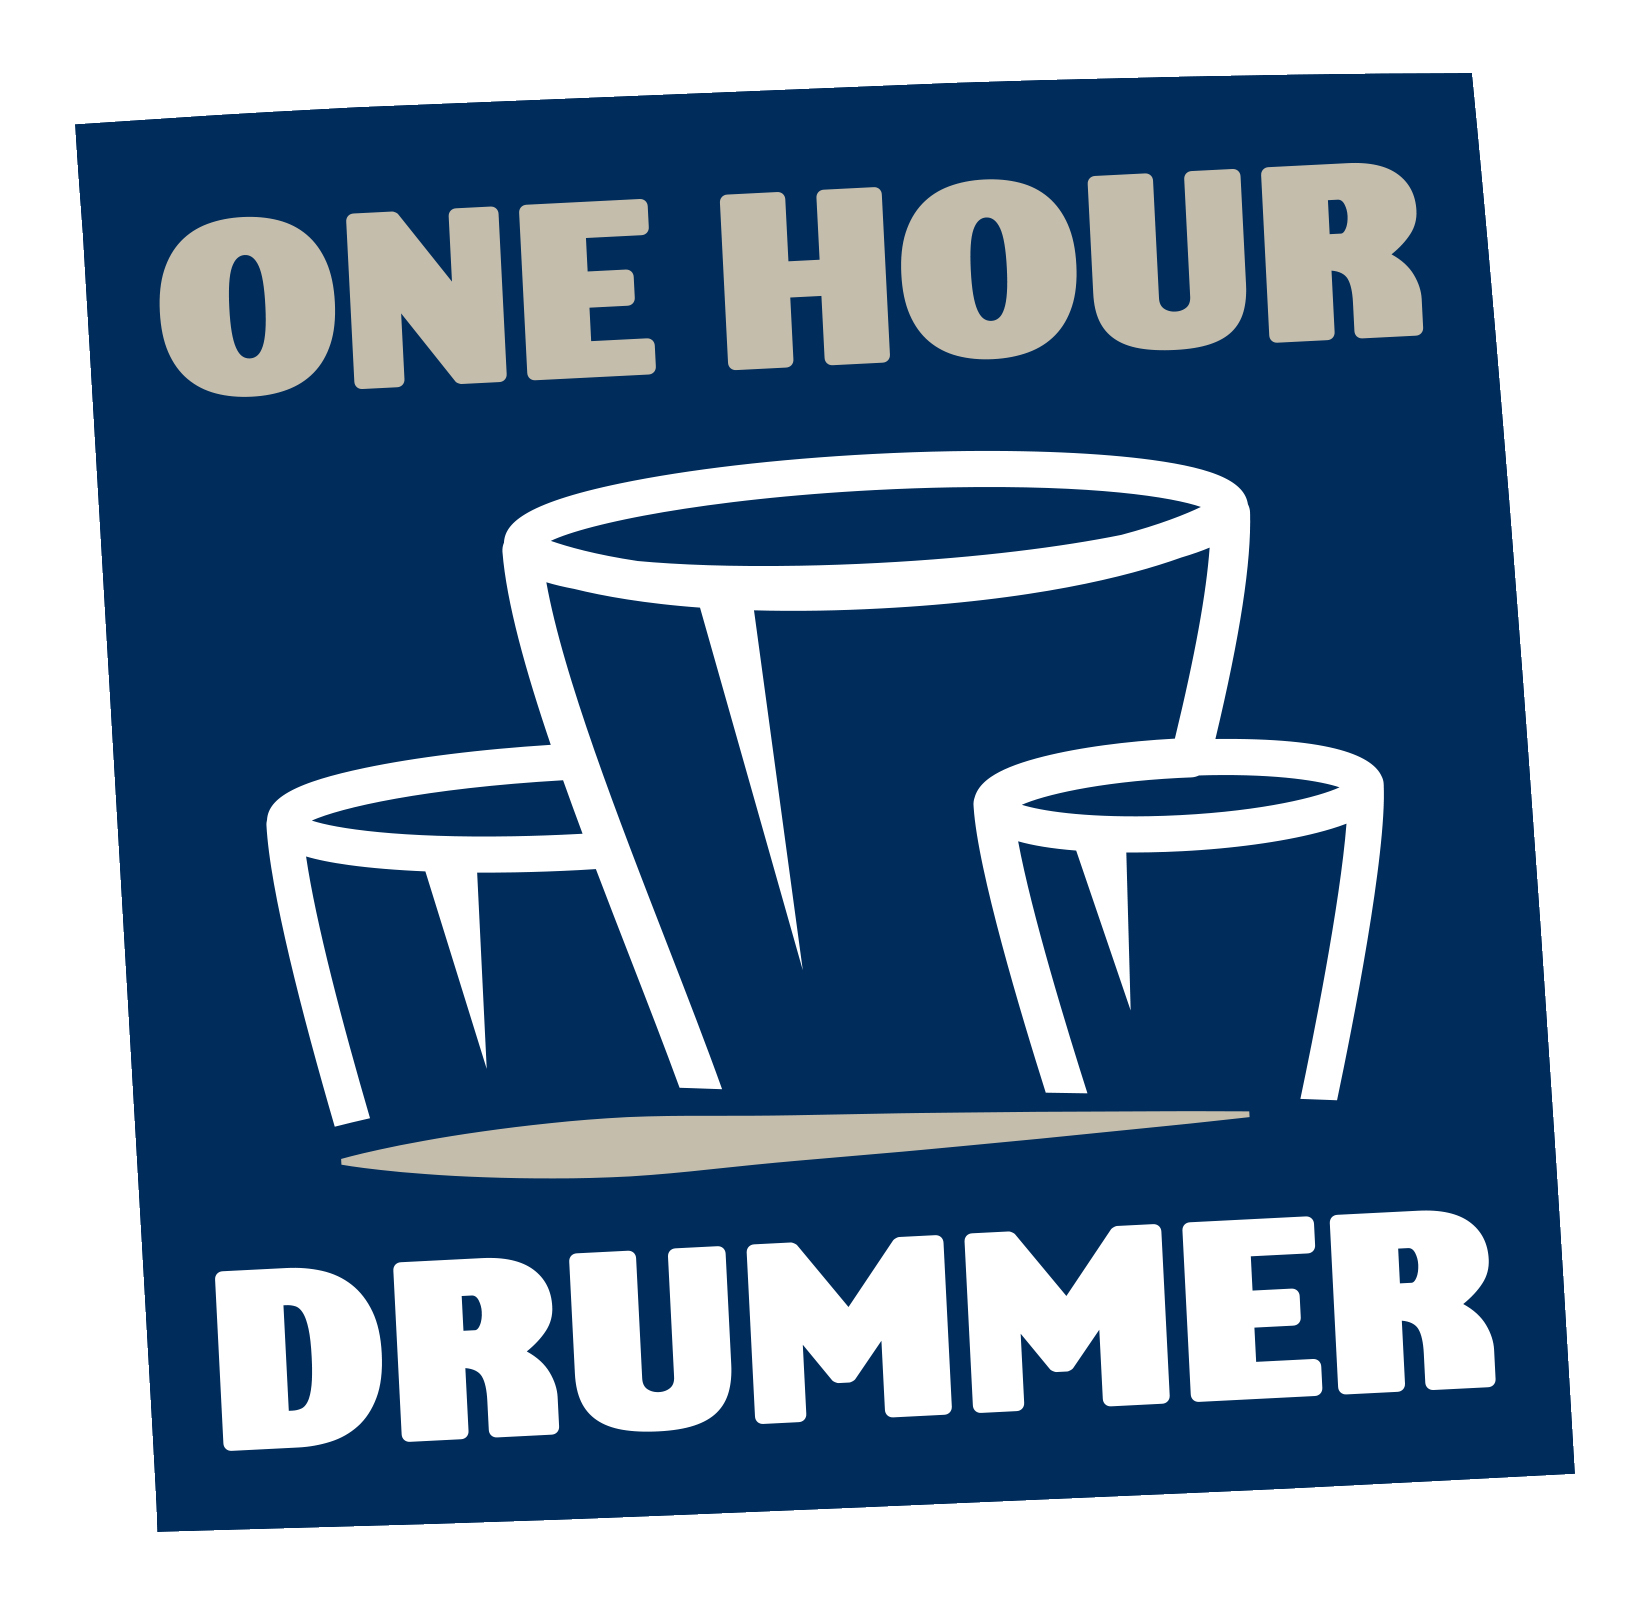 One Hour Drummer.png